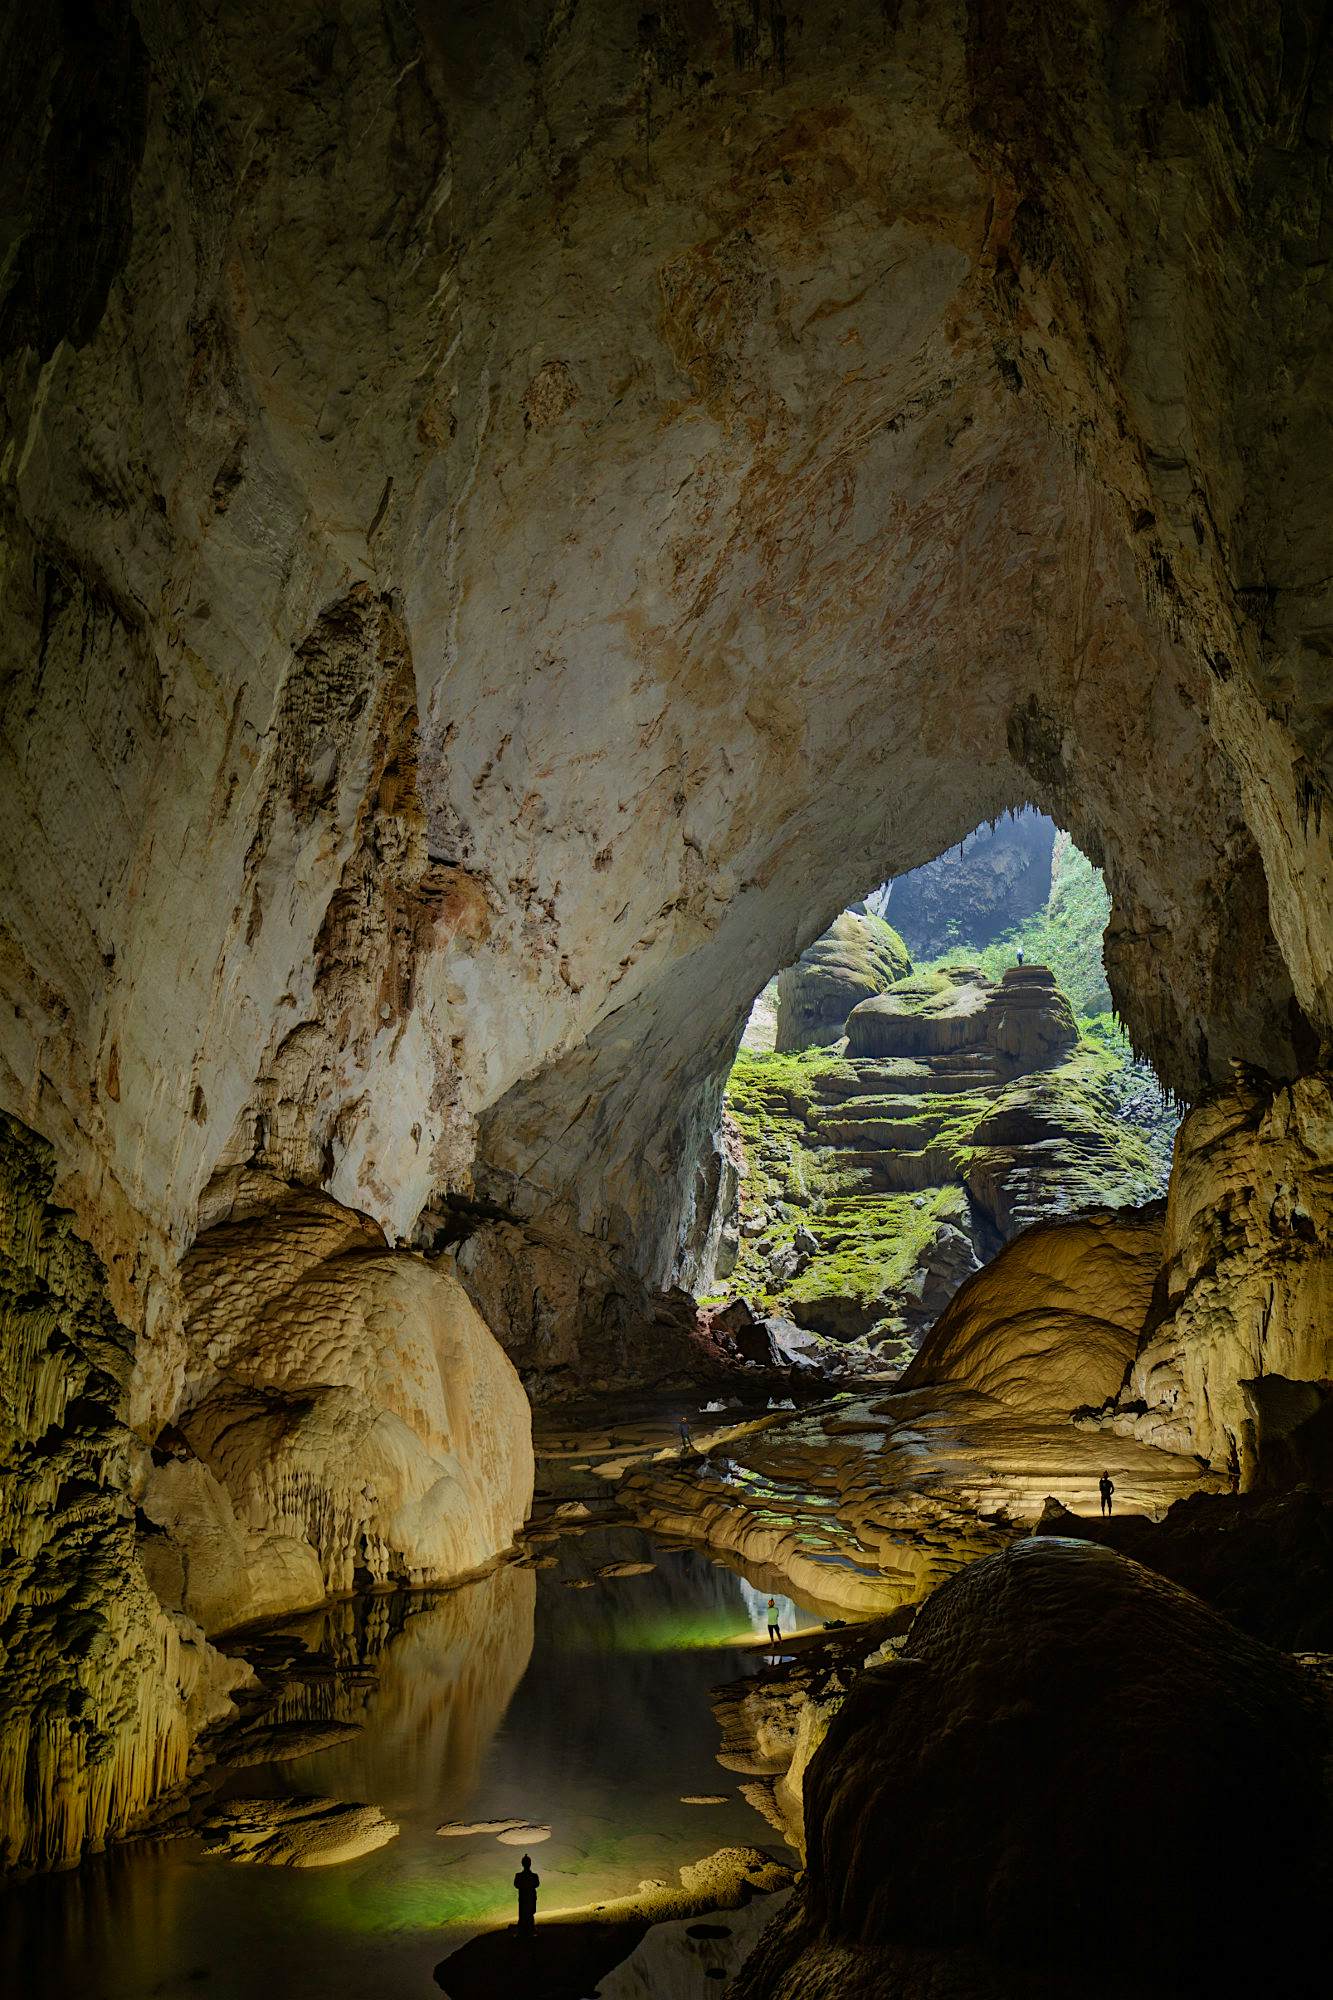 A large cave with water and boulders near the entrance. The size of this cave is put into context by the silhouettes of several people standing at various points within the cave